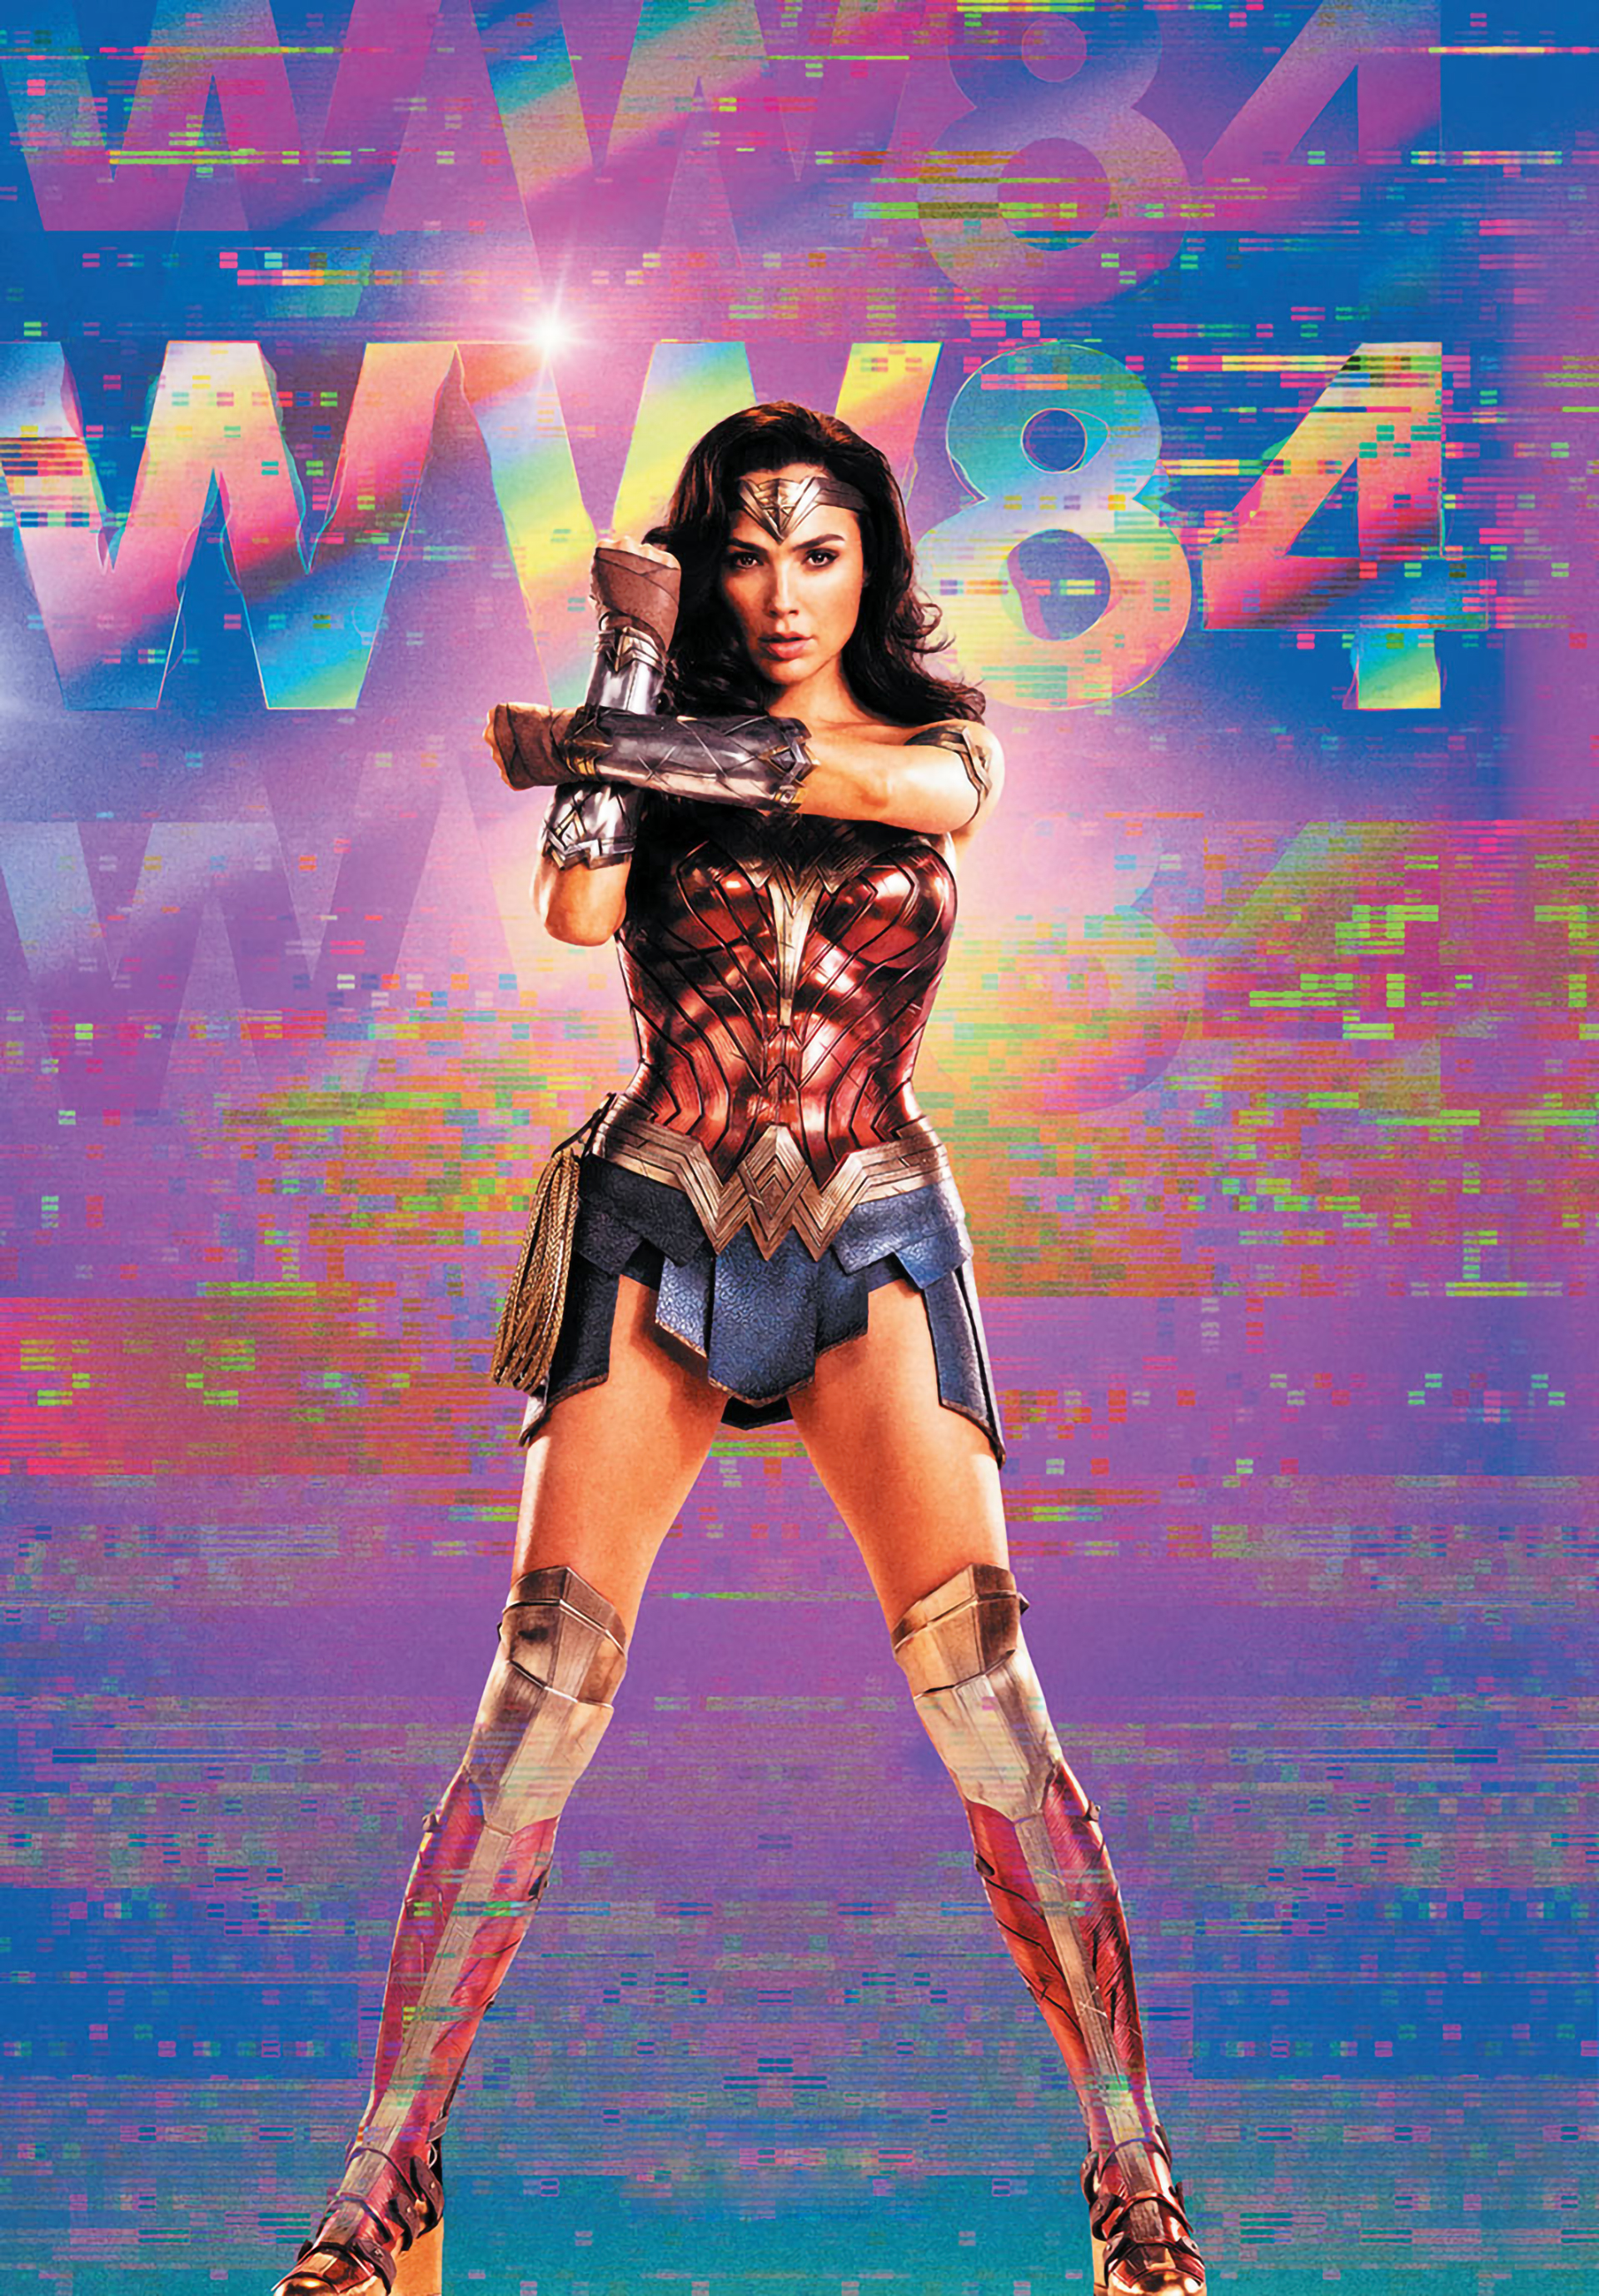 Dc Wonder Woman 1984 Wallpaper Hd Movies 4k Wallpapers Images Photos And Background Wallpapers Den